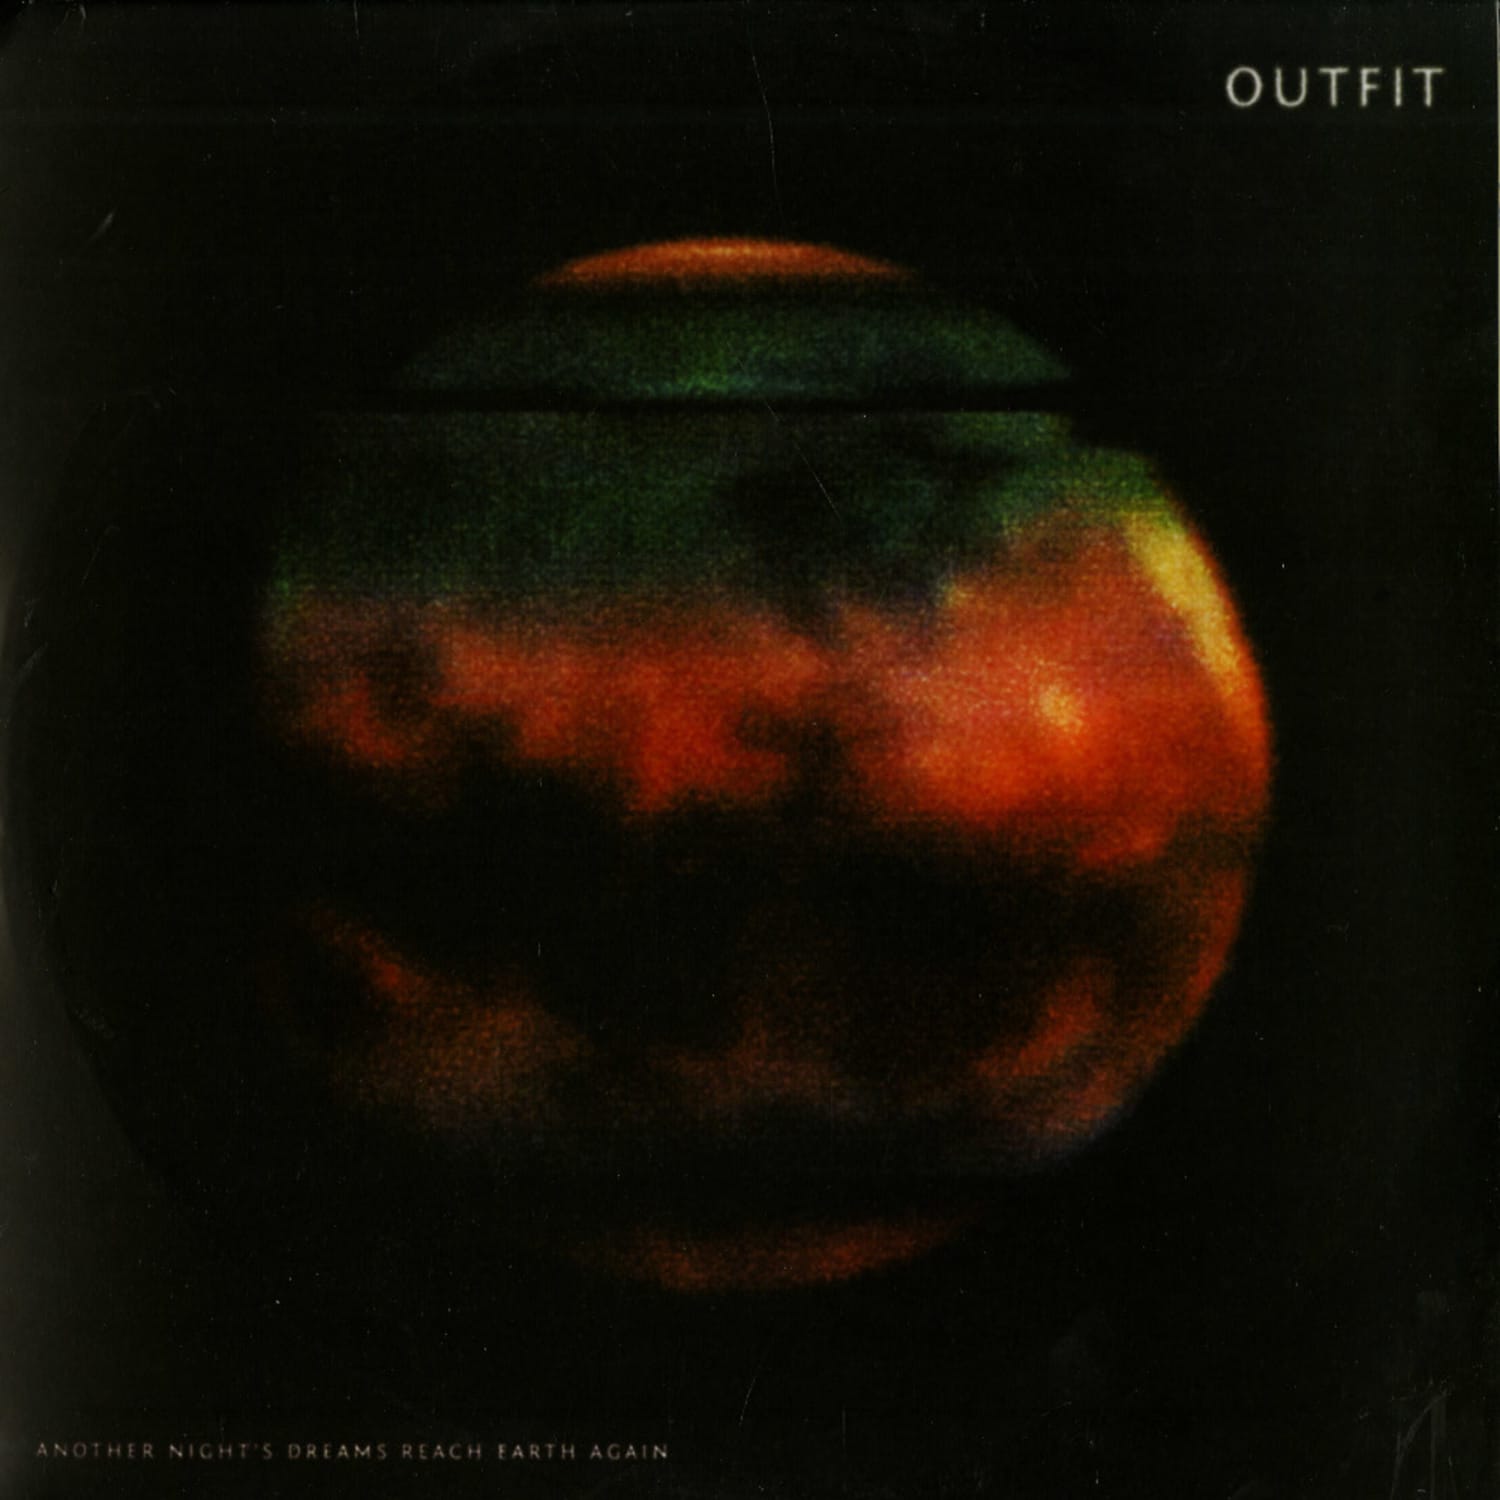 Outfit - ANOTHER NIGHTS DREAMS REACH EARTH AGAIN